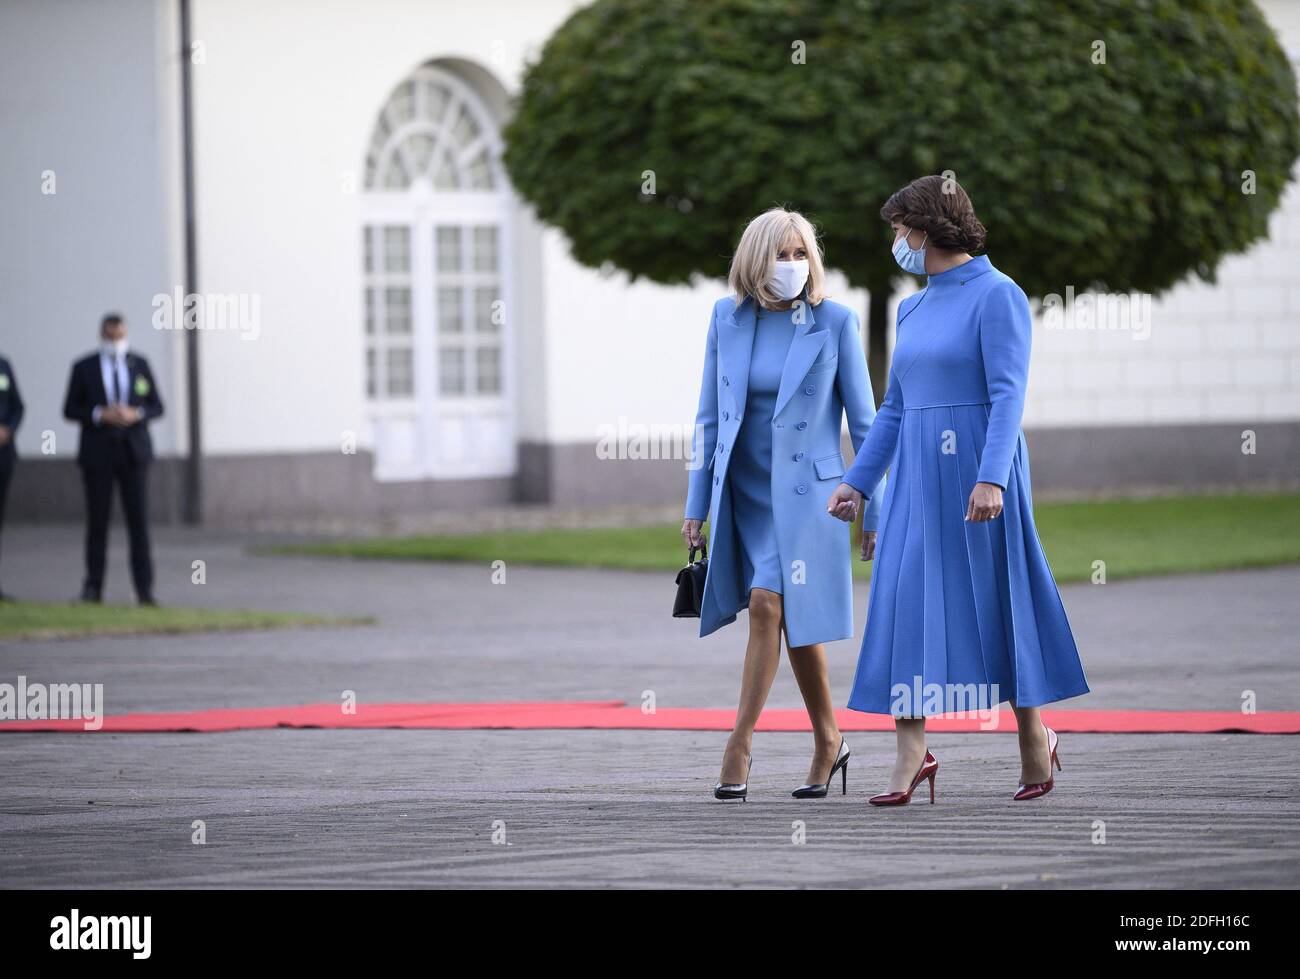 French President Emmanuel Macron and his wife Brigitte are welcomed by Lithuania's President Gitanas Nauseda and his wife Diana Nausediene as they arrive at the Presidential Palace in Vilnius, Lithuania on September 28, 2020. Photo by Eliot Blondet/ABACAPRESS.COM Stock Photo